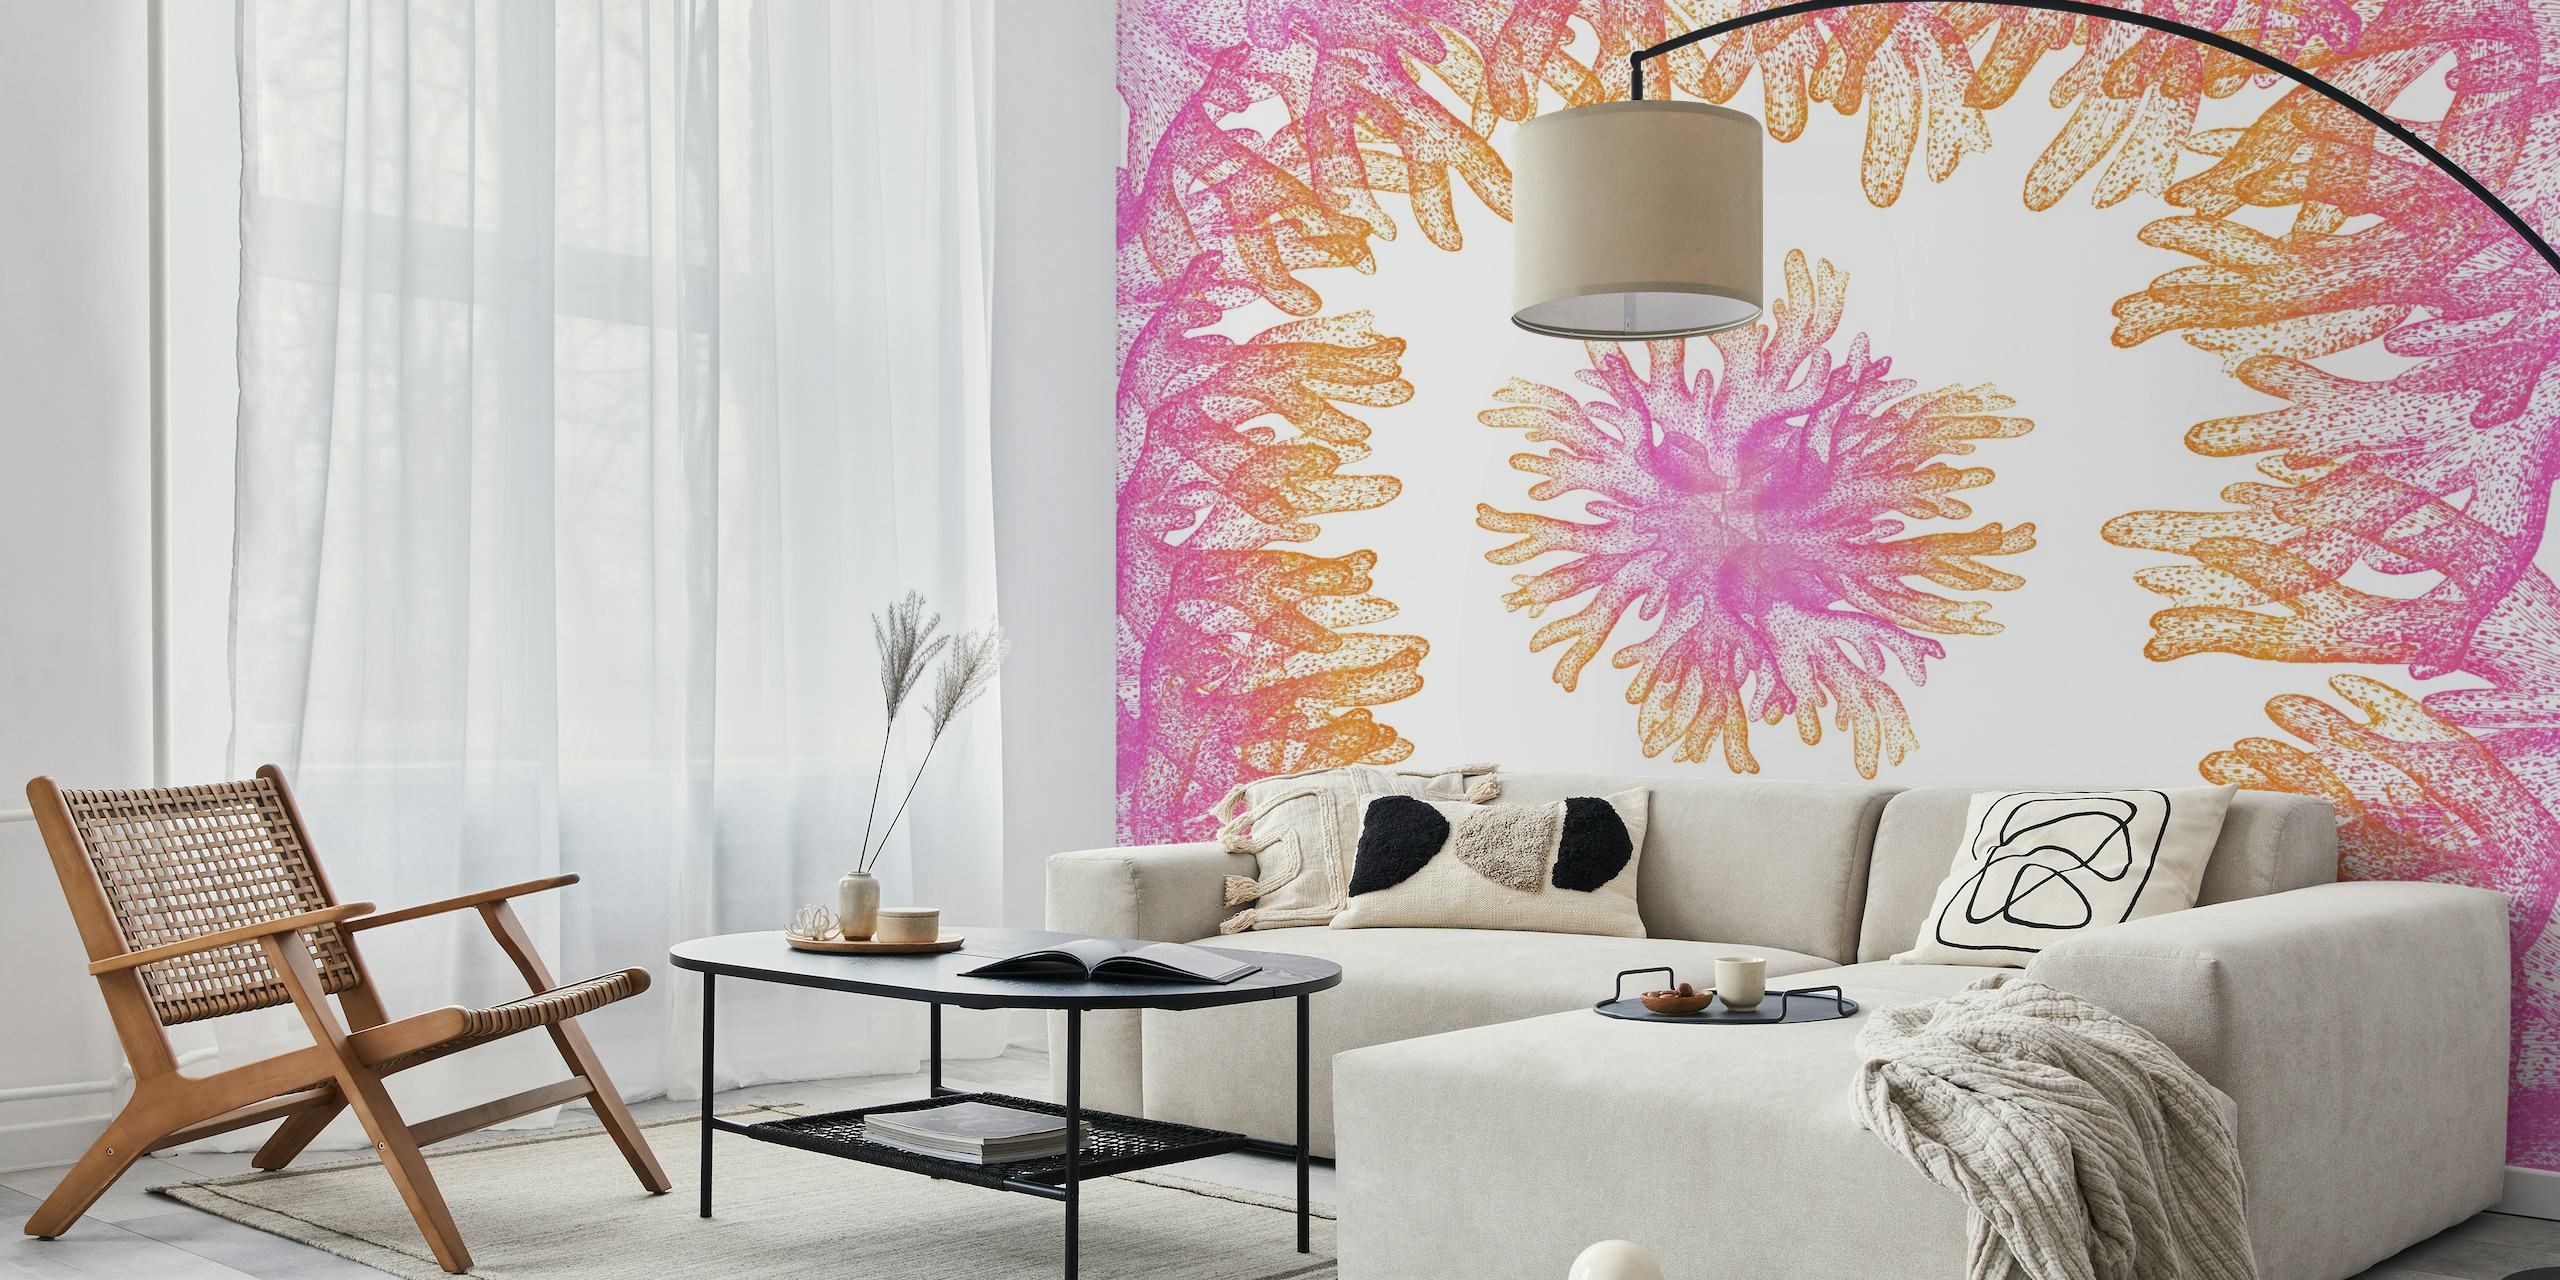 Elegant pink and gold coral reef wall mural design